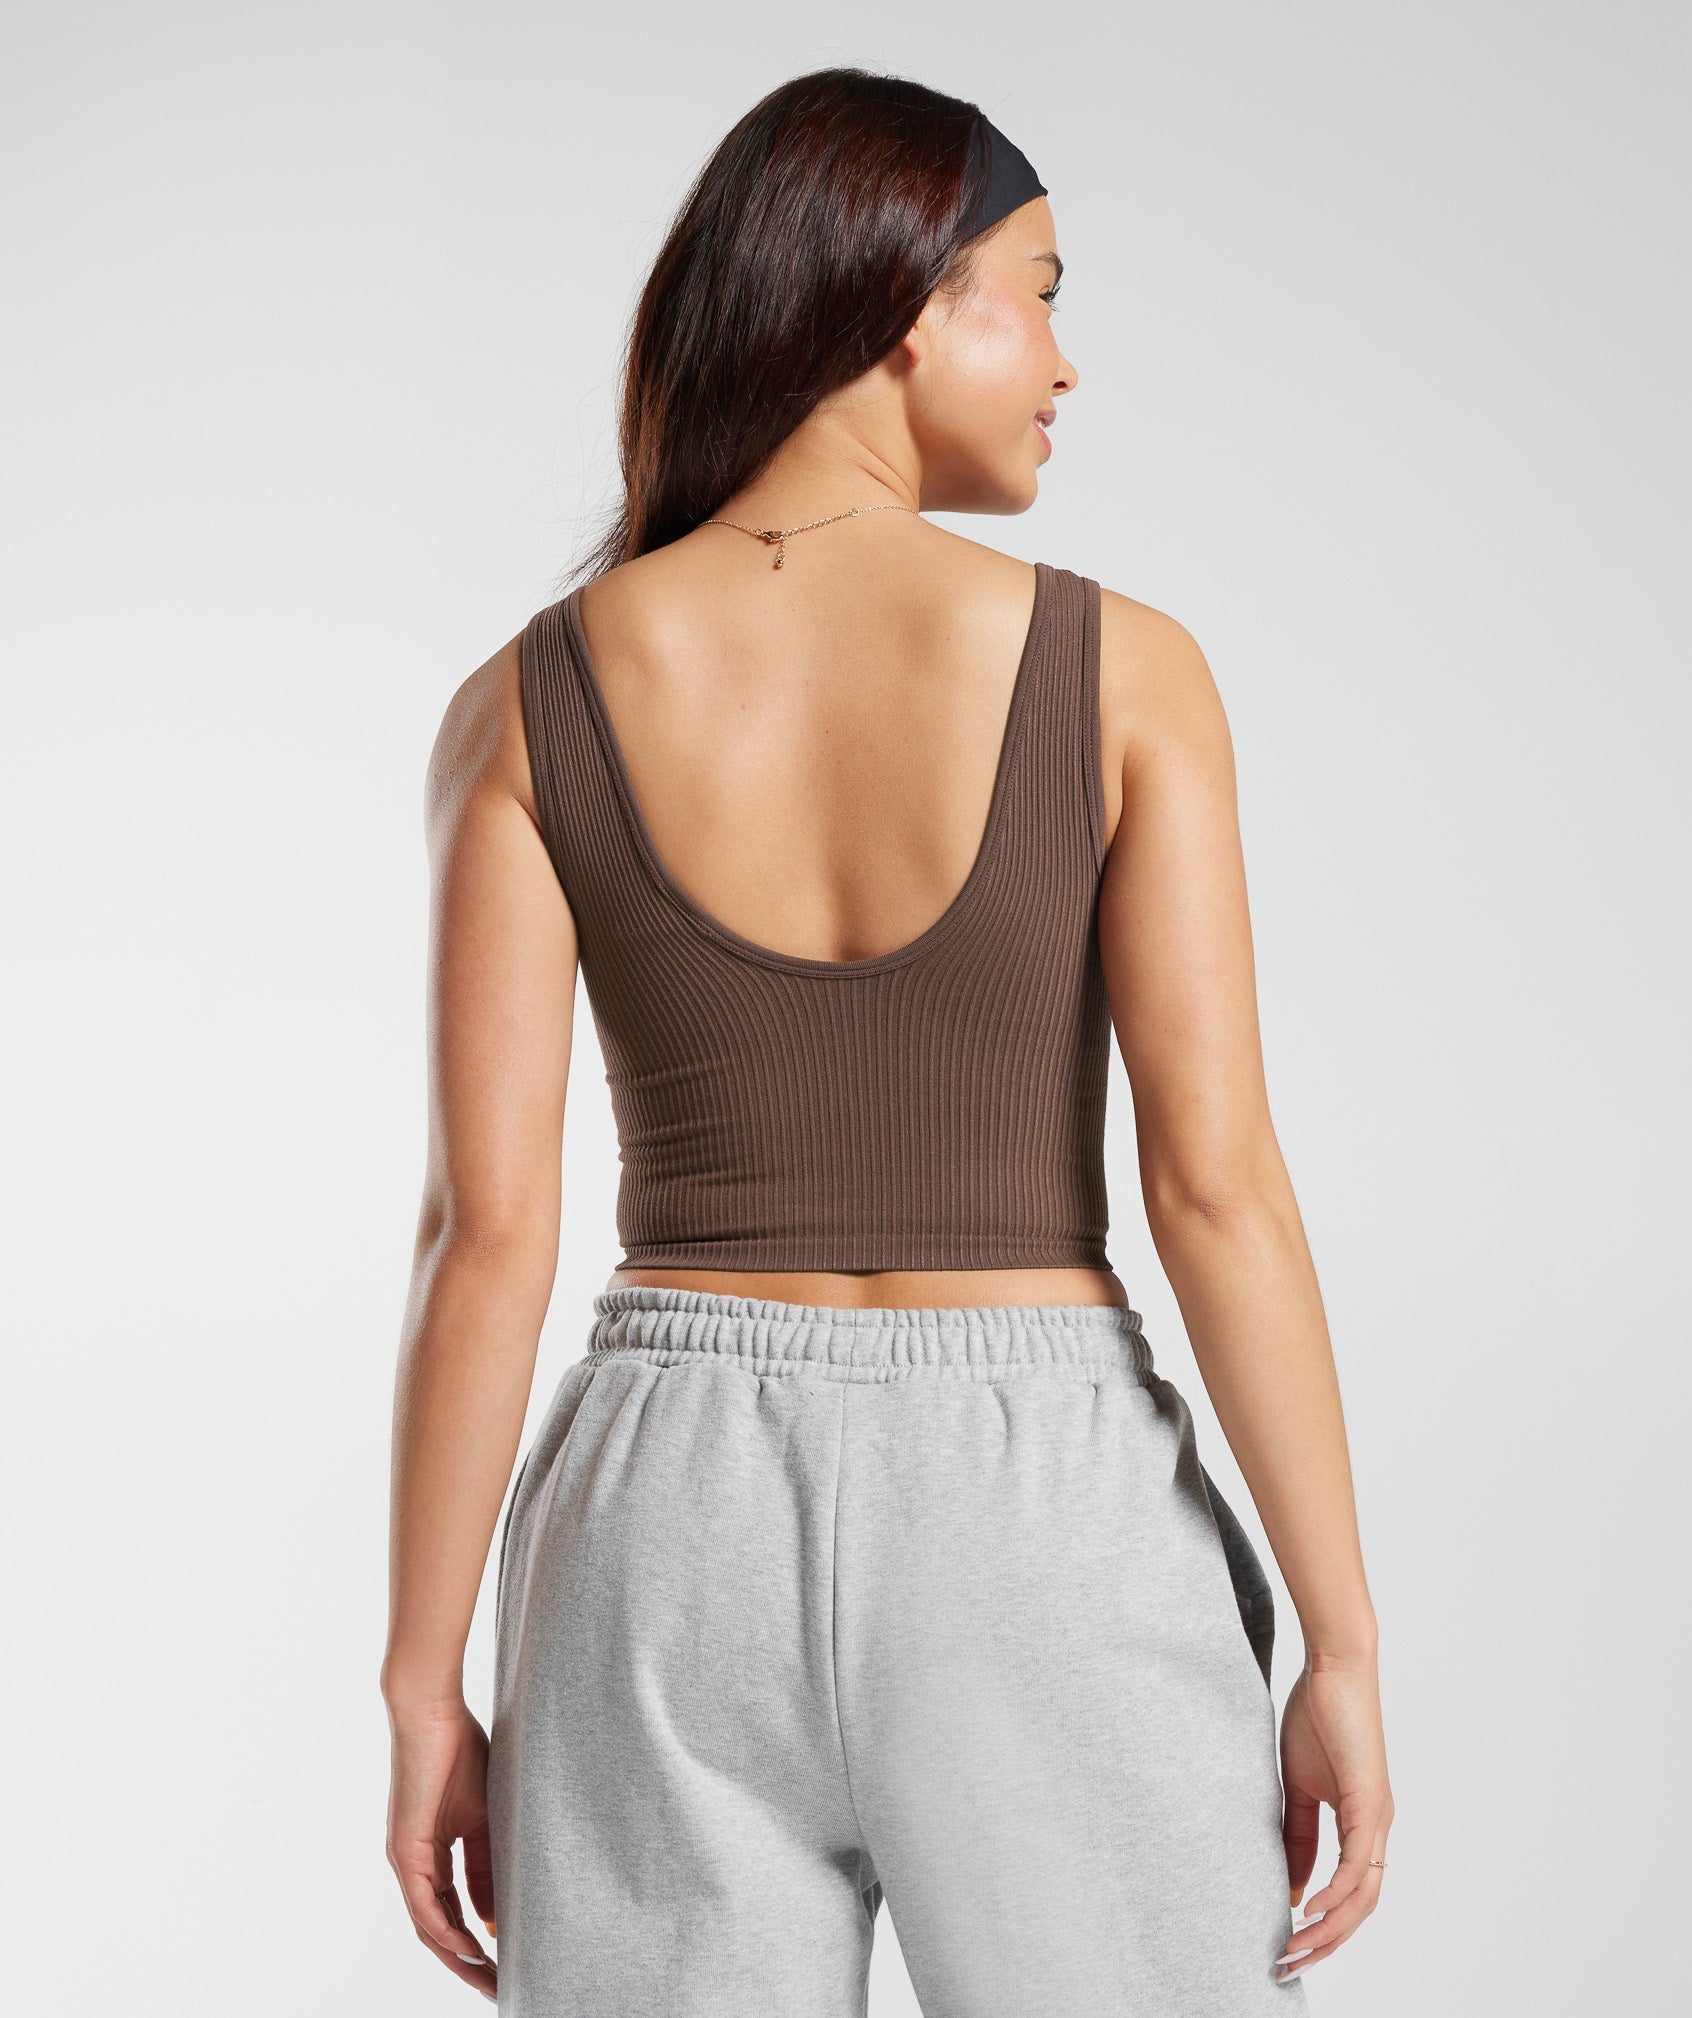 Women S Gymshark Energy Seamless Crop Tank Top Bra Rose Taupe Brown  Cut-Outs